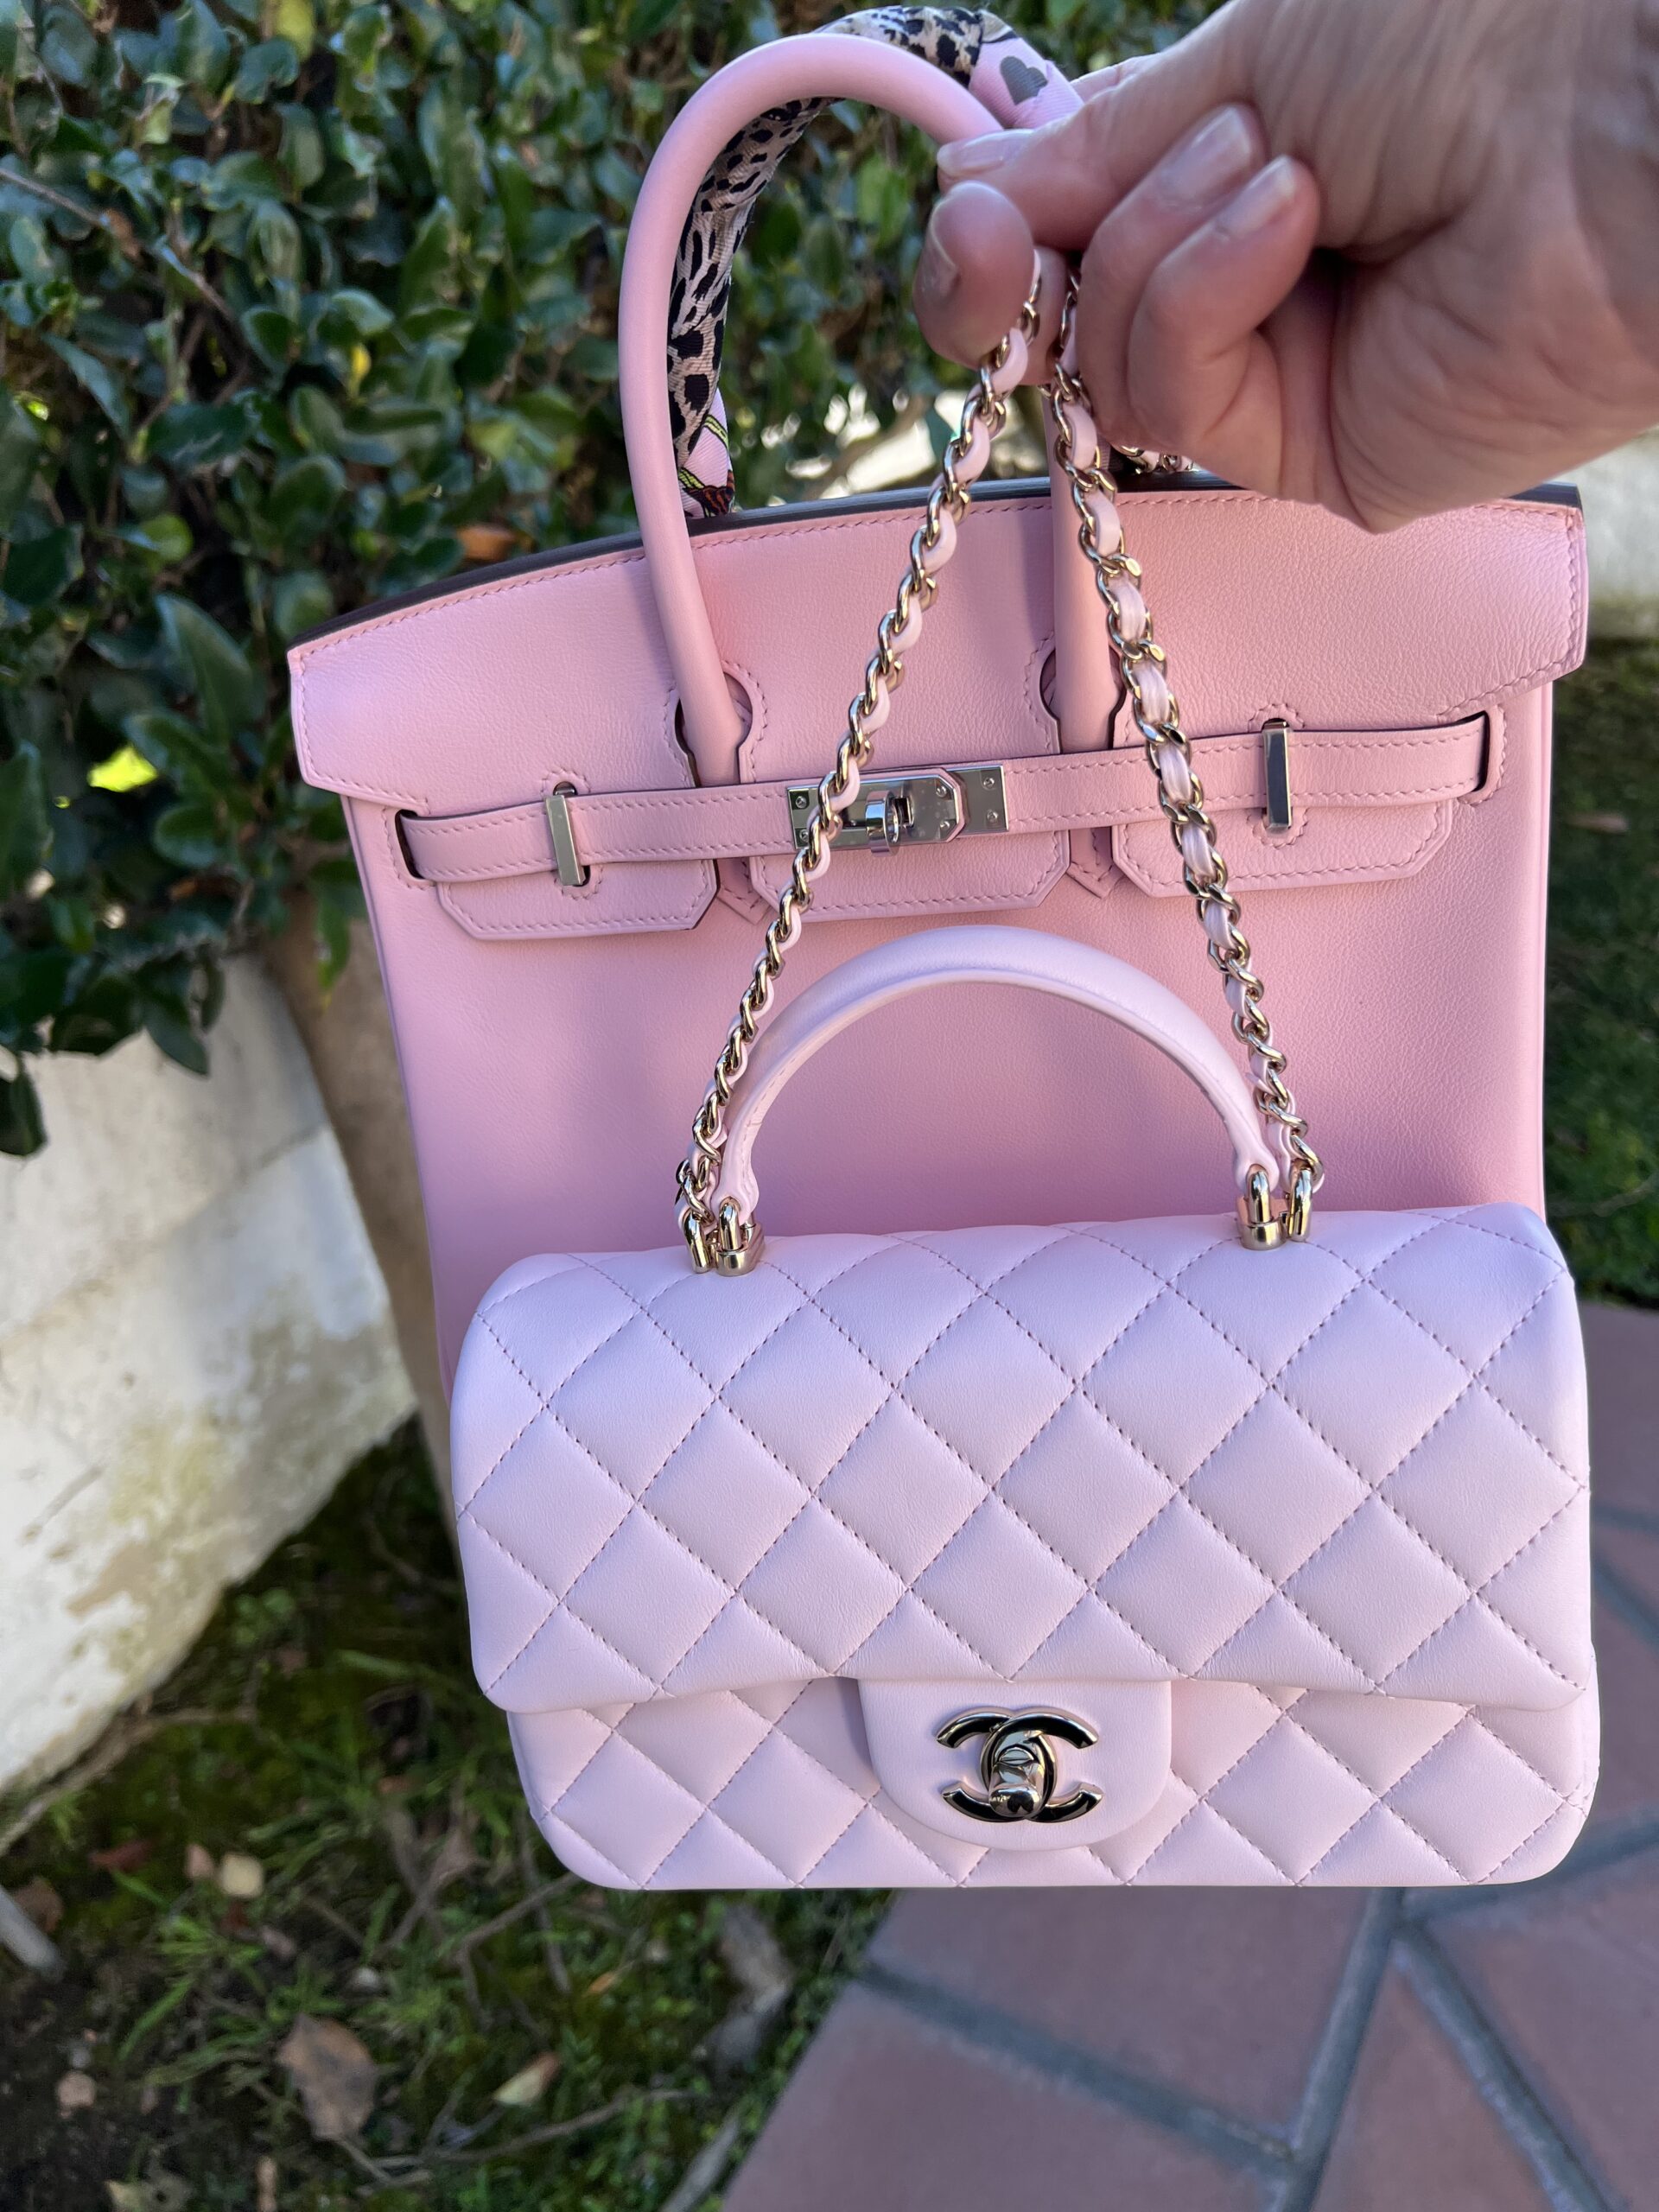 coco and chanel bags authentic